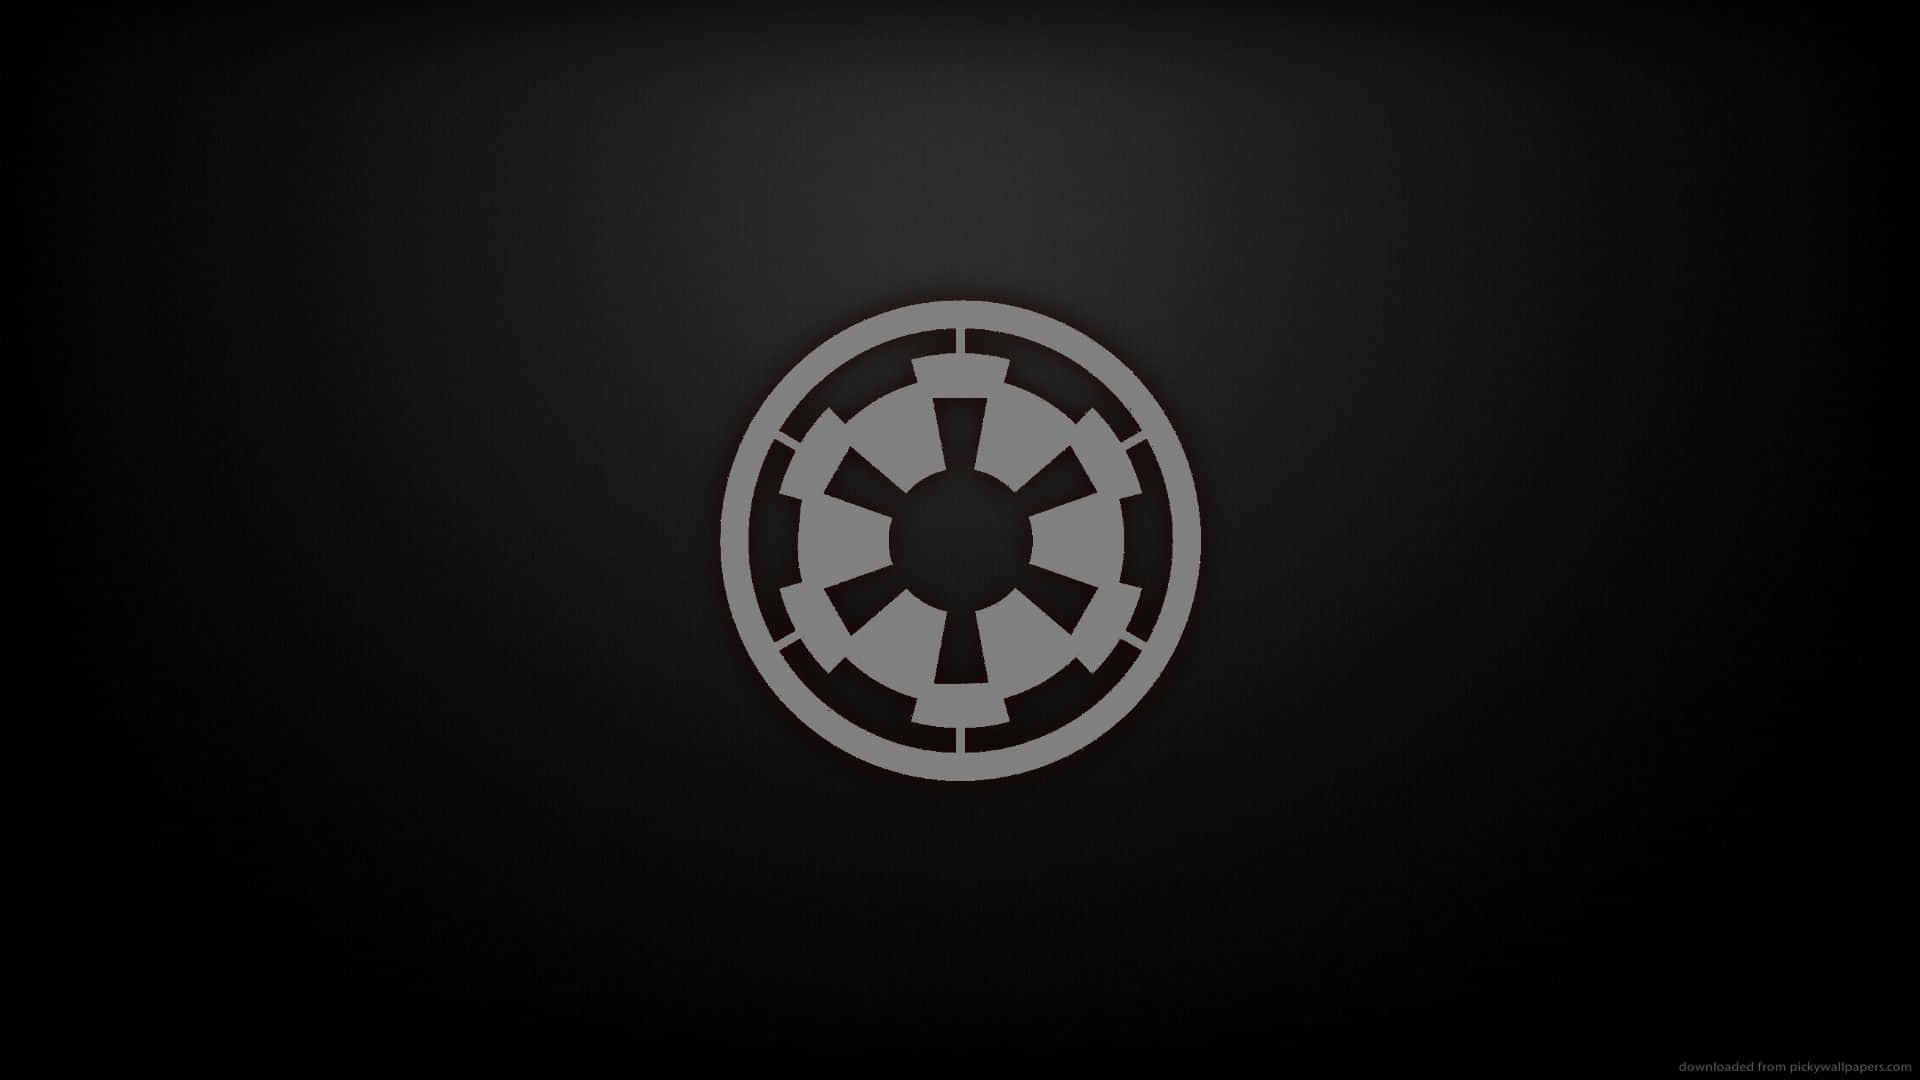 Grayscale Imperial Galactic Empire Symbol Wallpaper